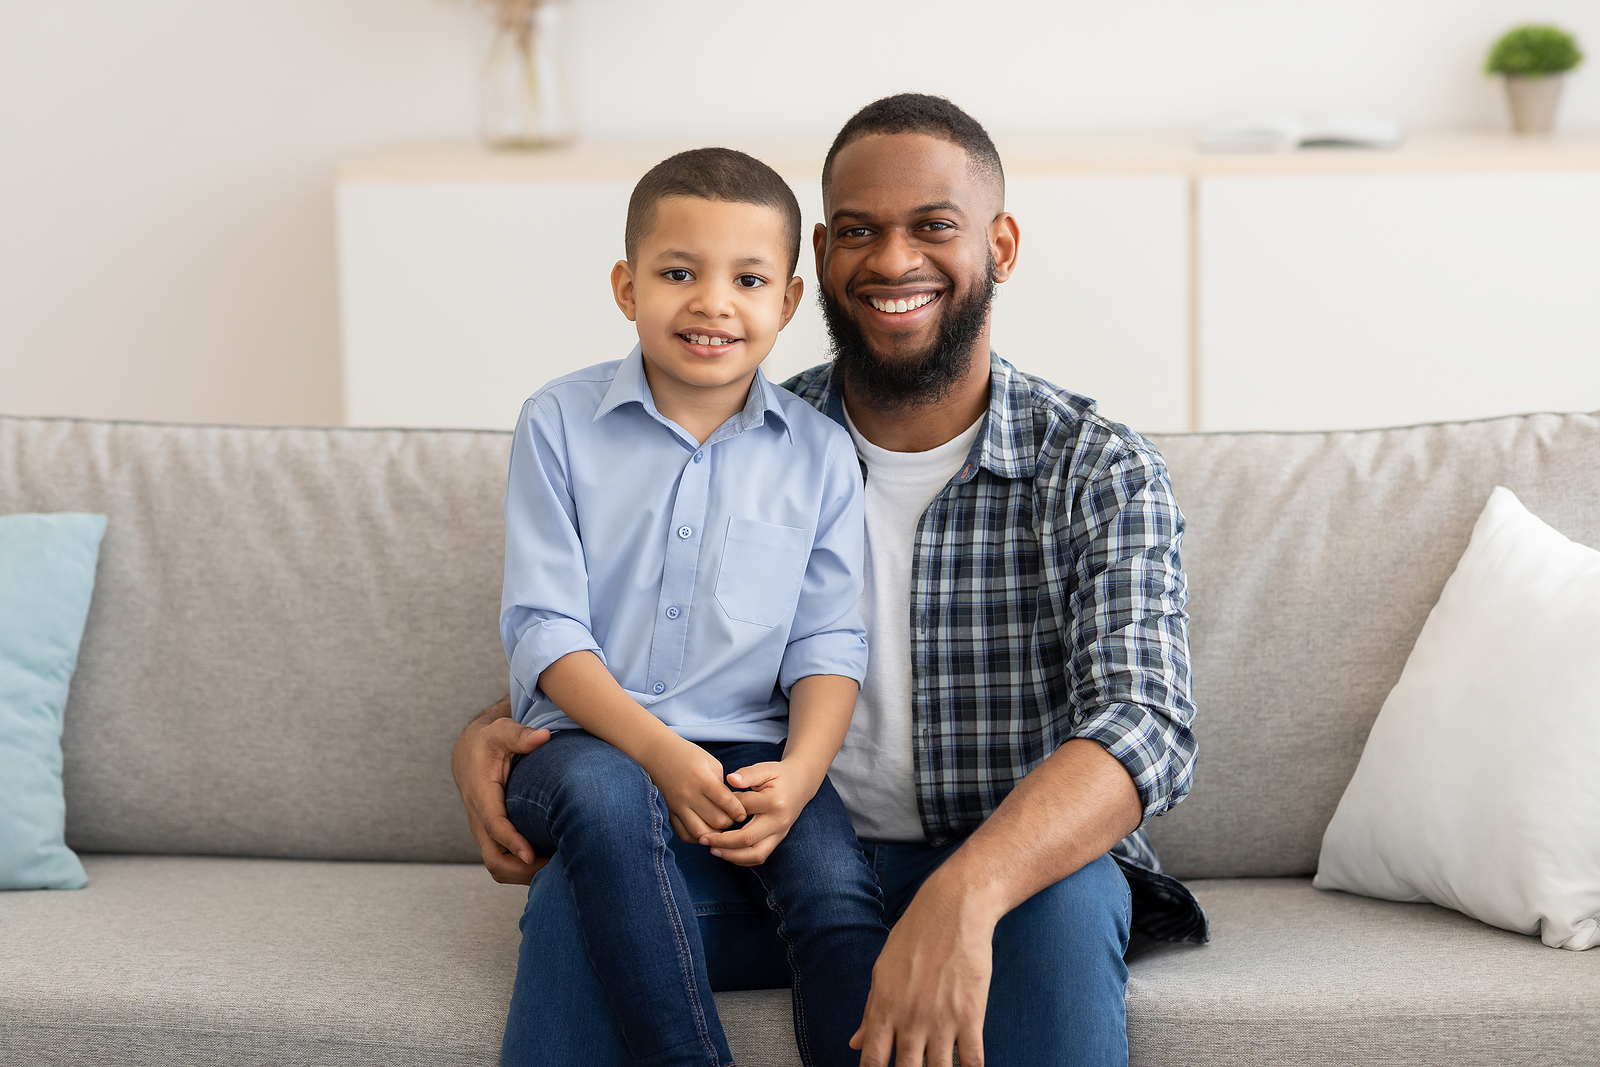 A black man sits on a couch with his young son on his lap. Both are smiling looking at the camera.